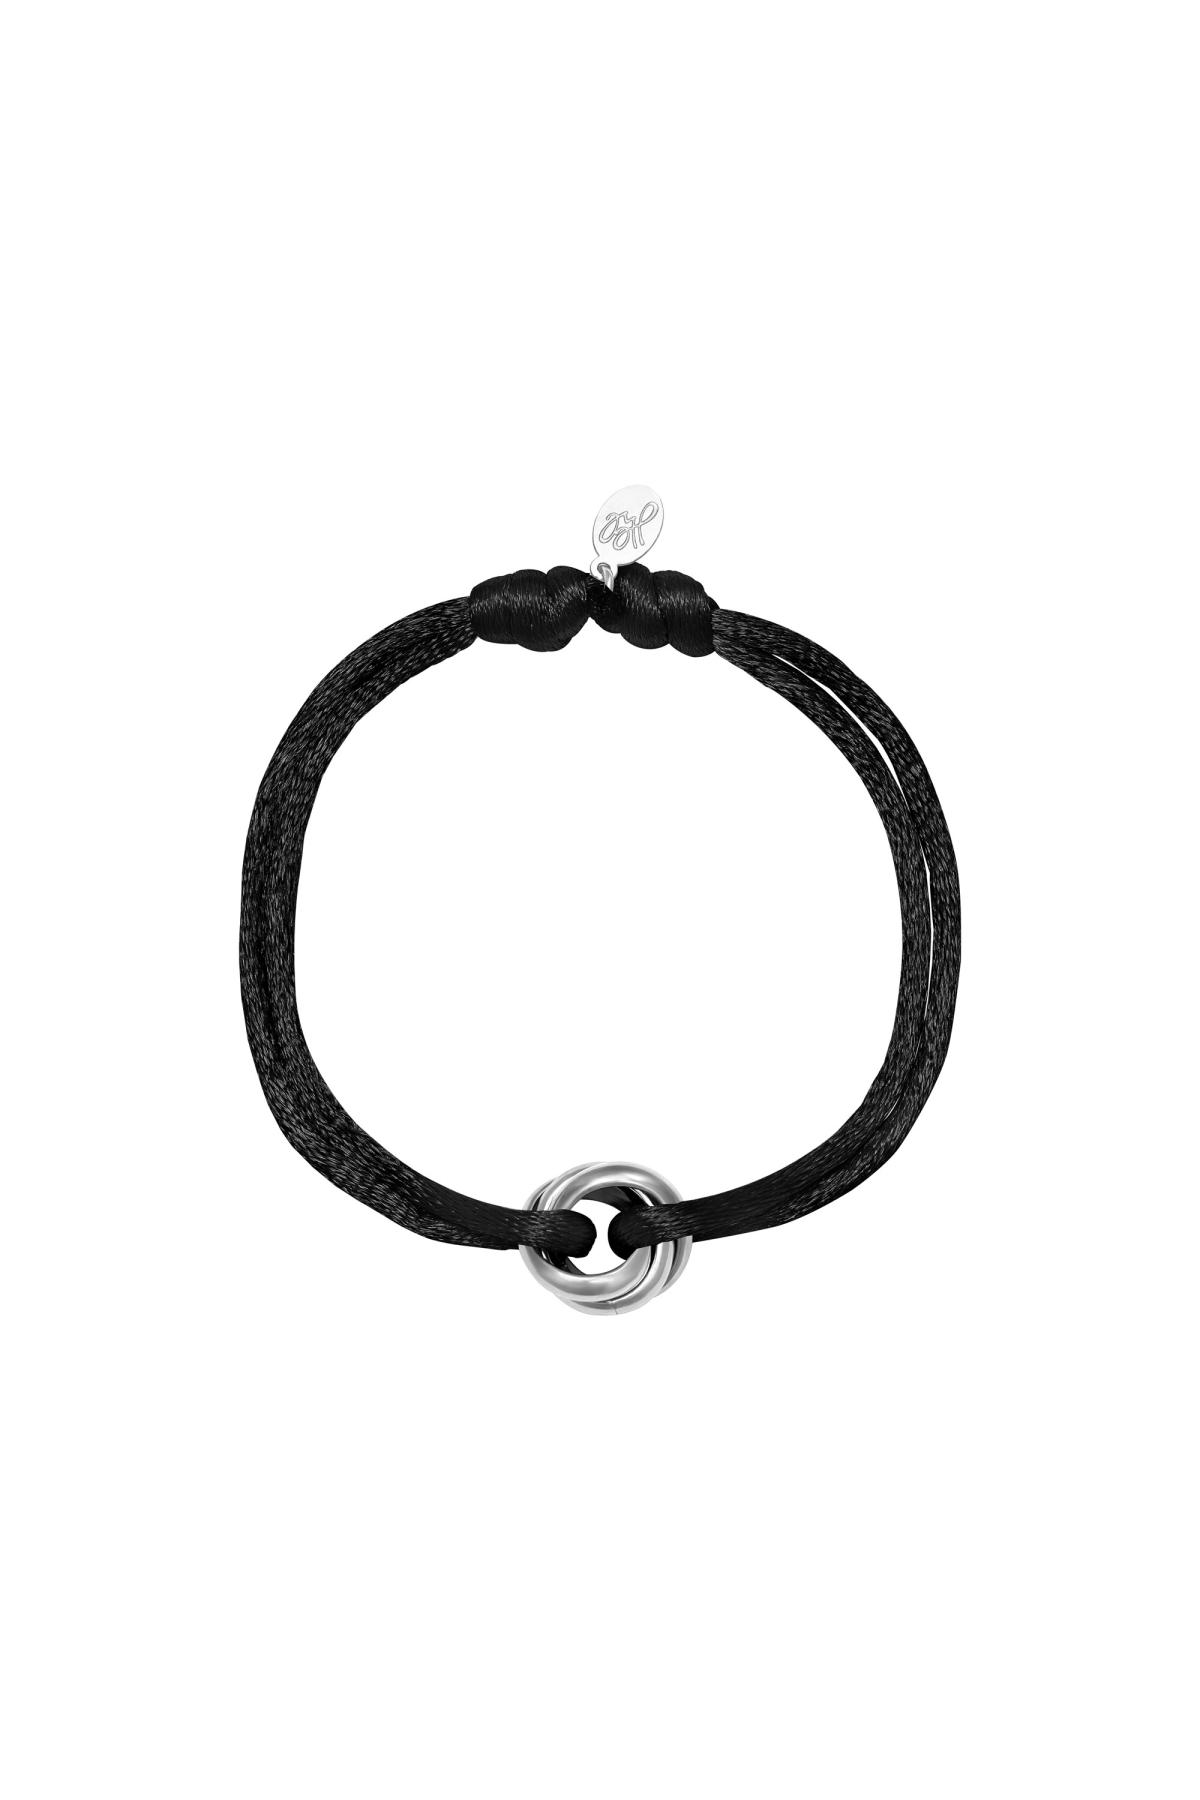 Black & Silver / Bracelet Satin Knot Black & Silver Stainless Steel Picture21